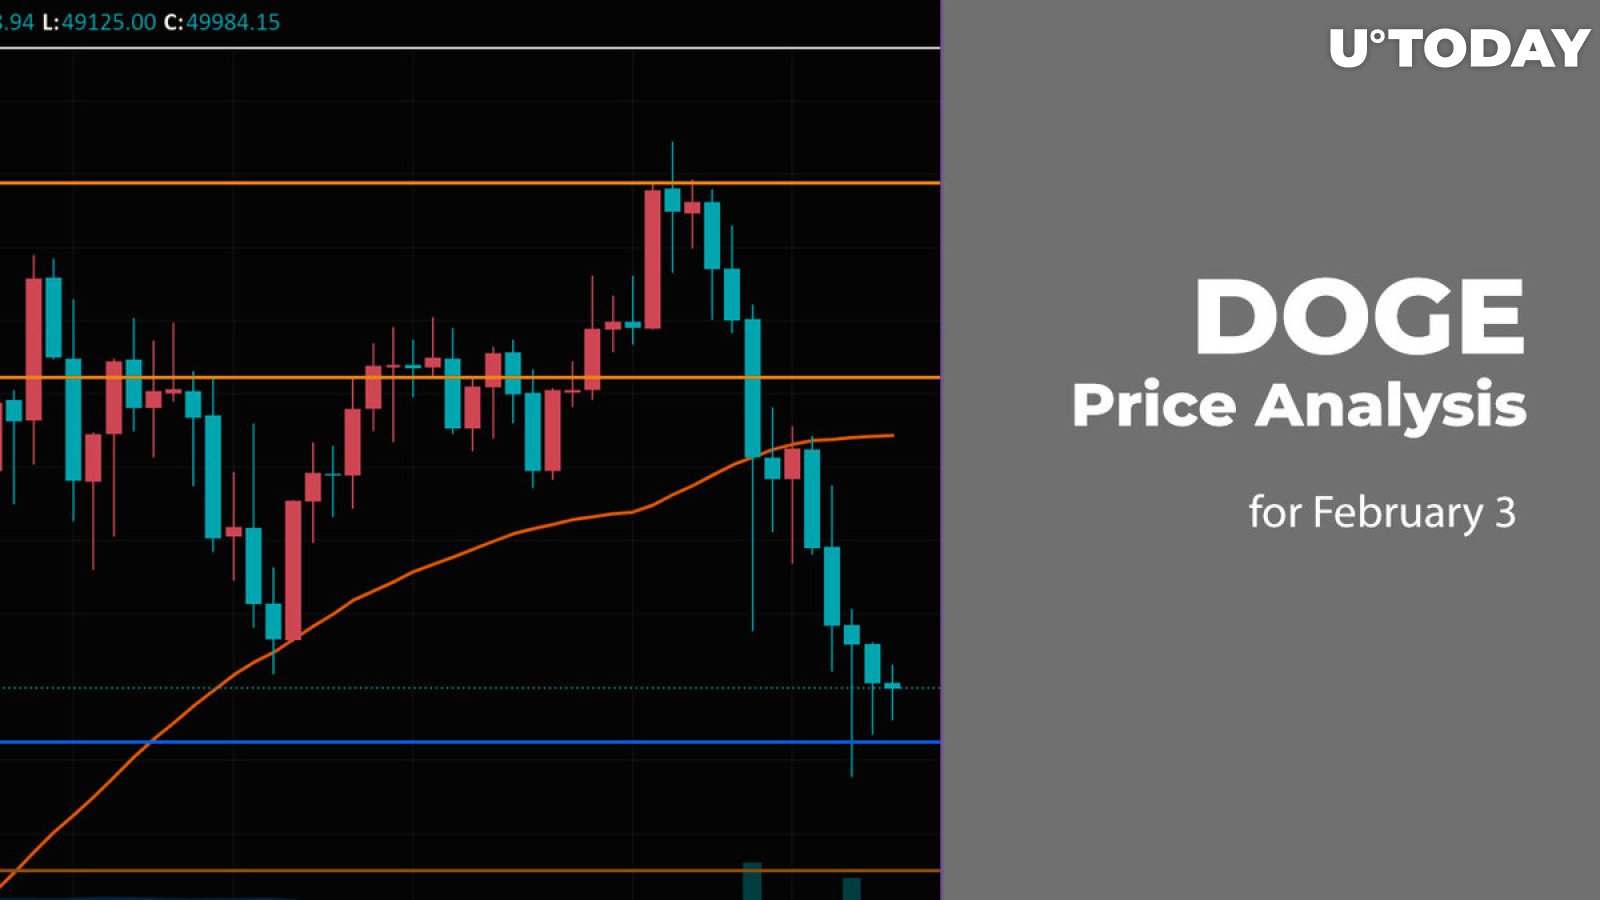 DOGE Price Analysis for February 3